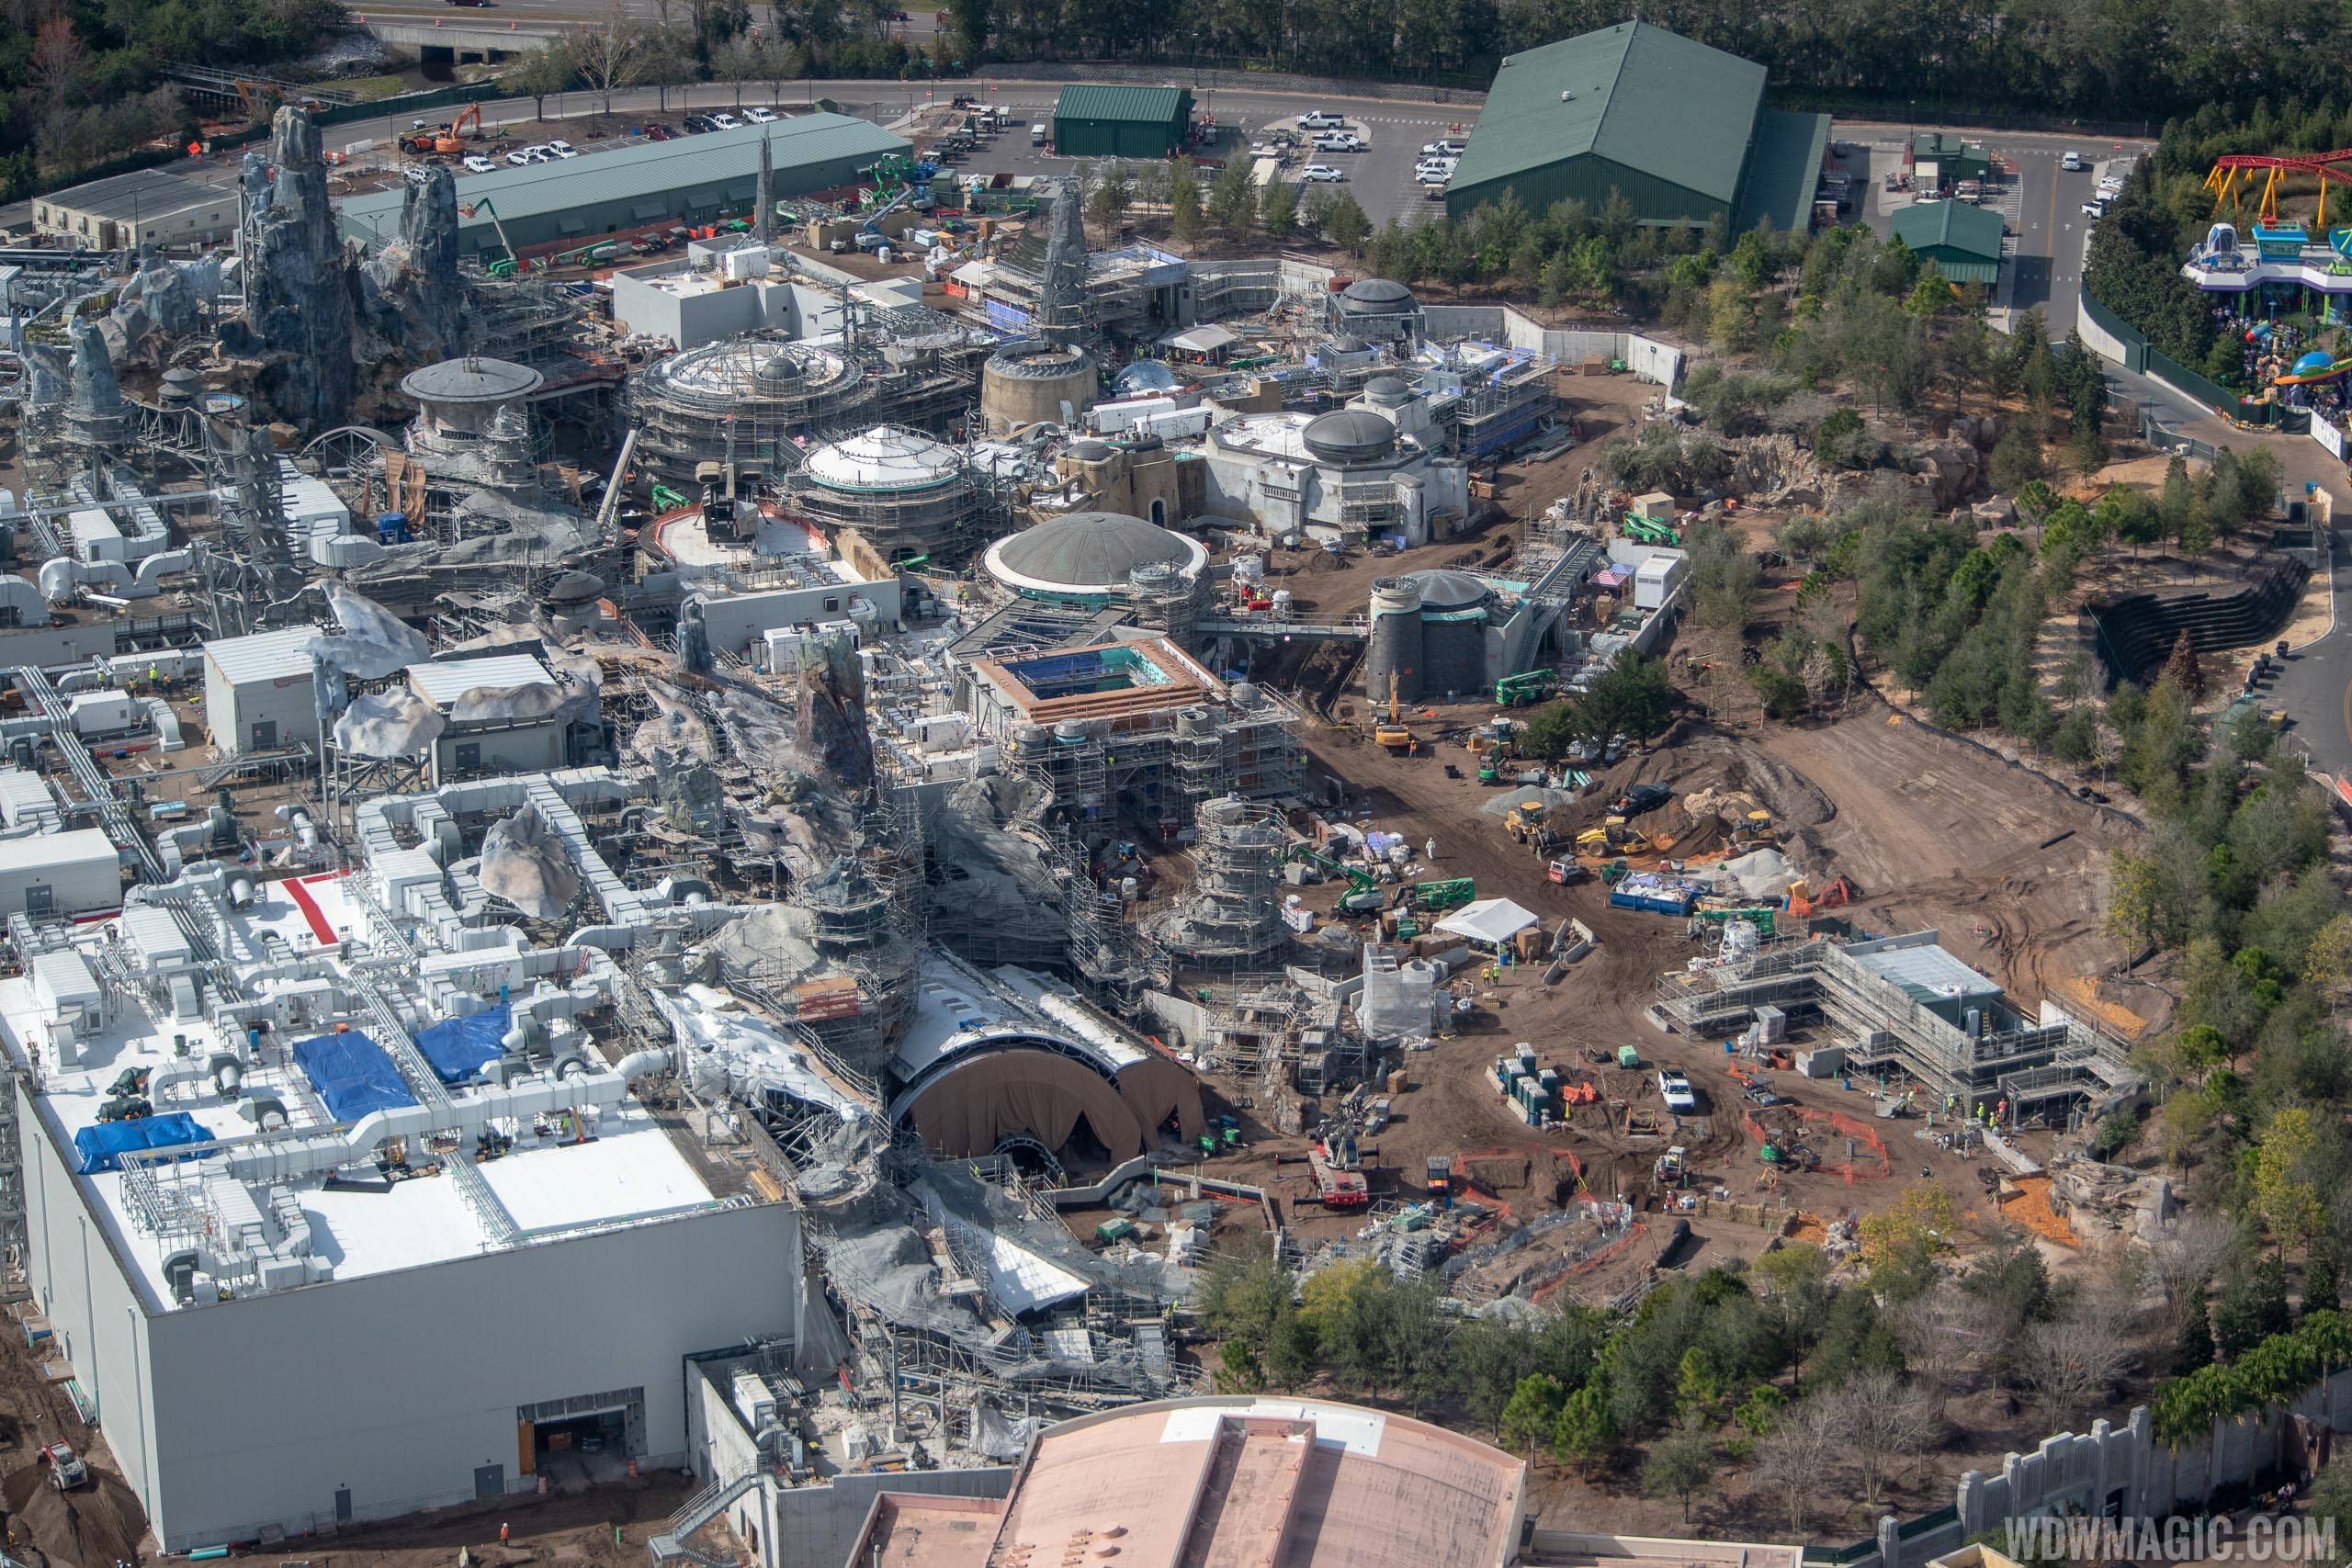 PHOTOS - Star Wars Galaxy's Edge aerial construction pictures